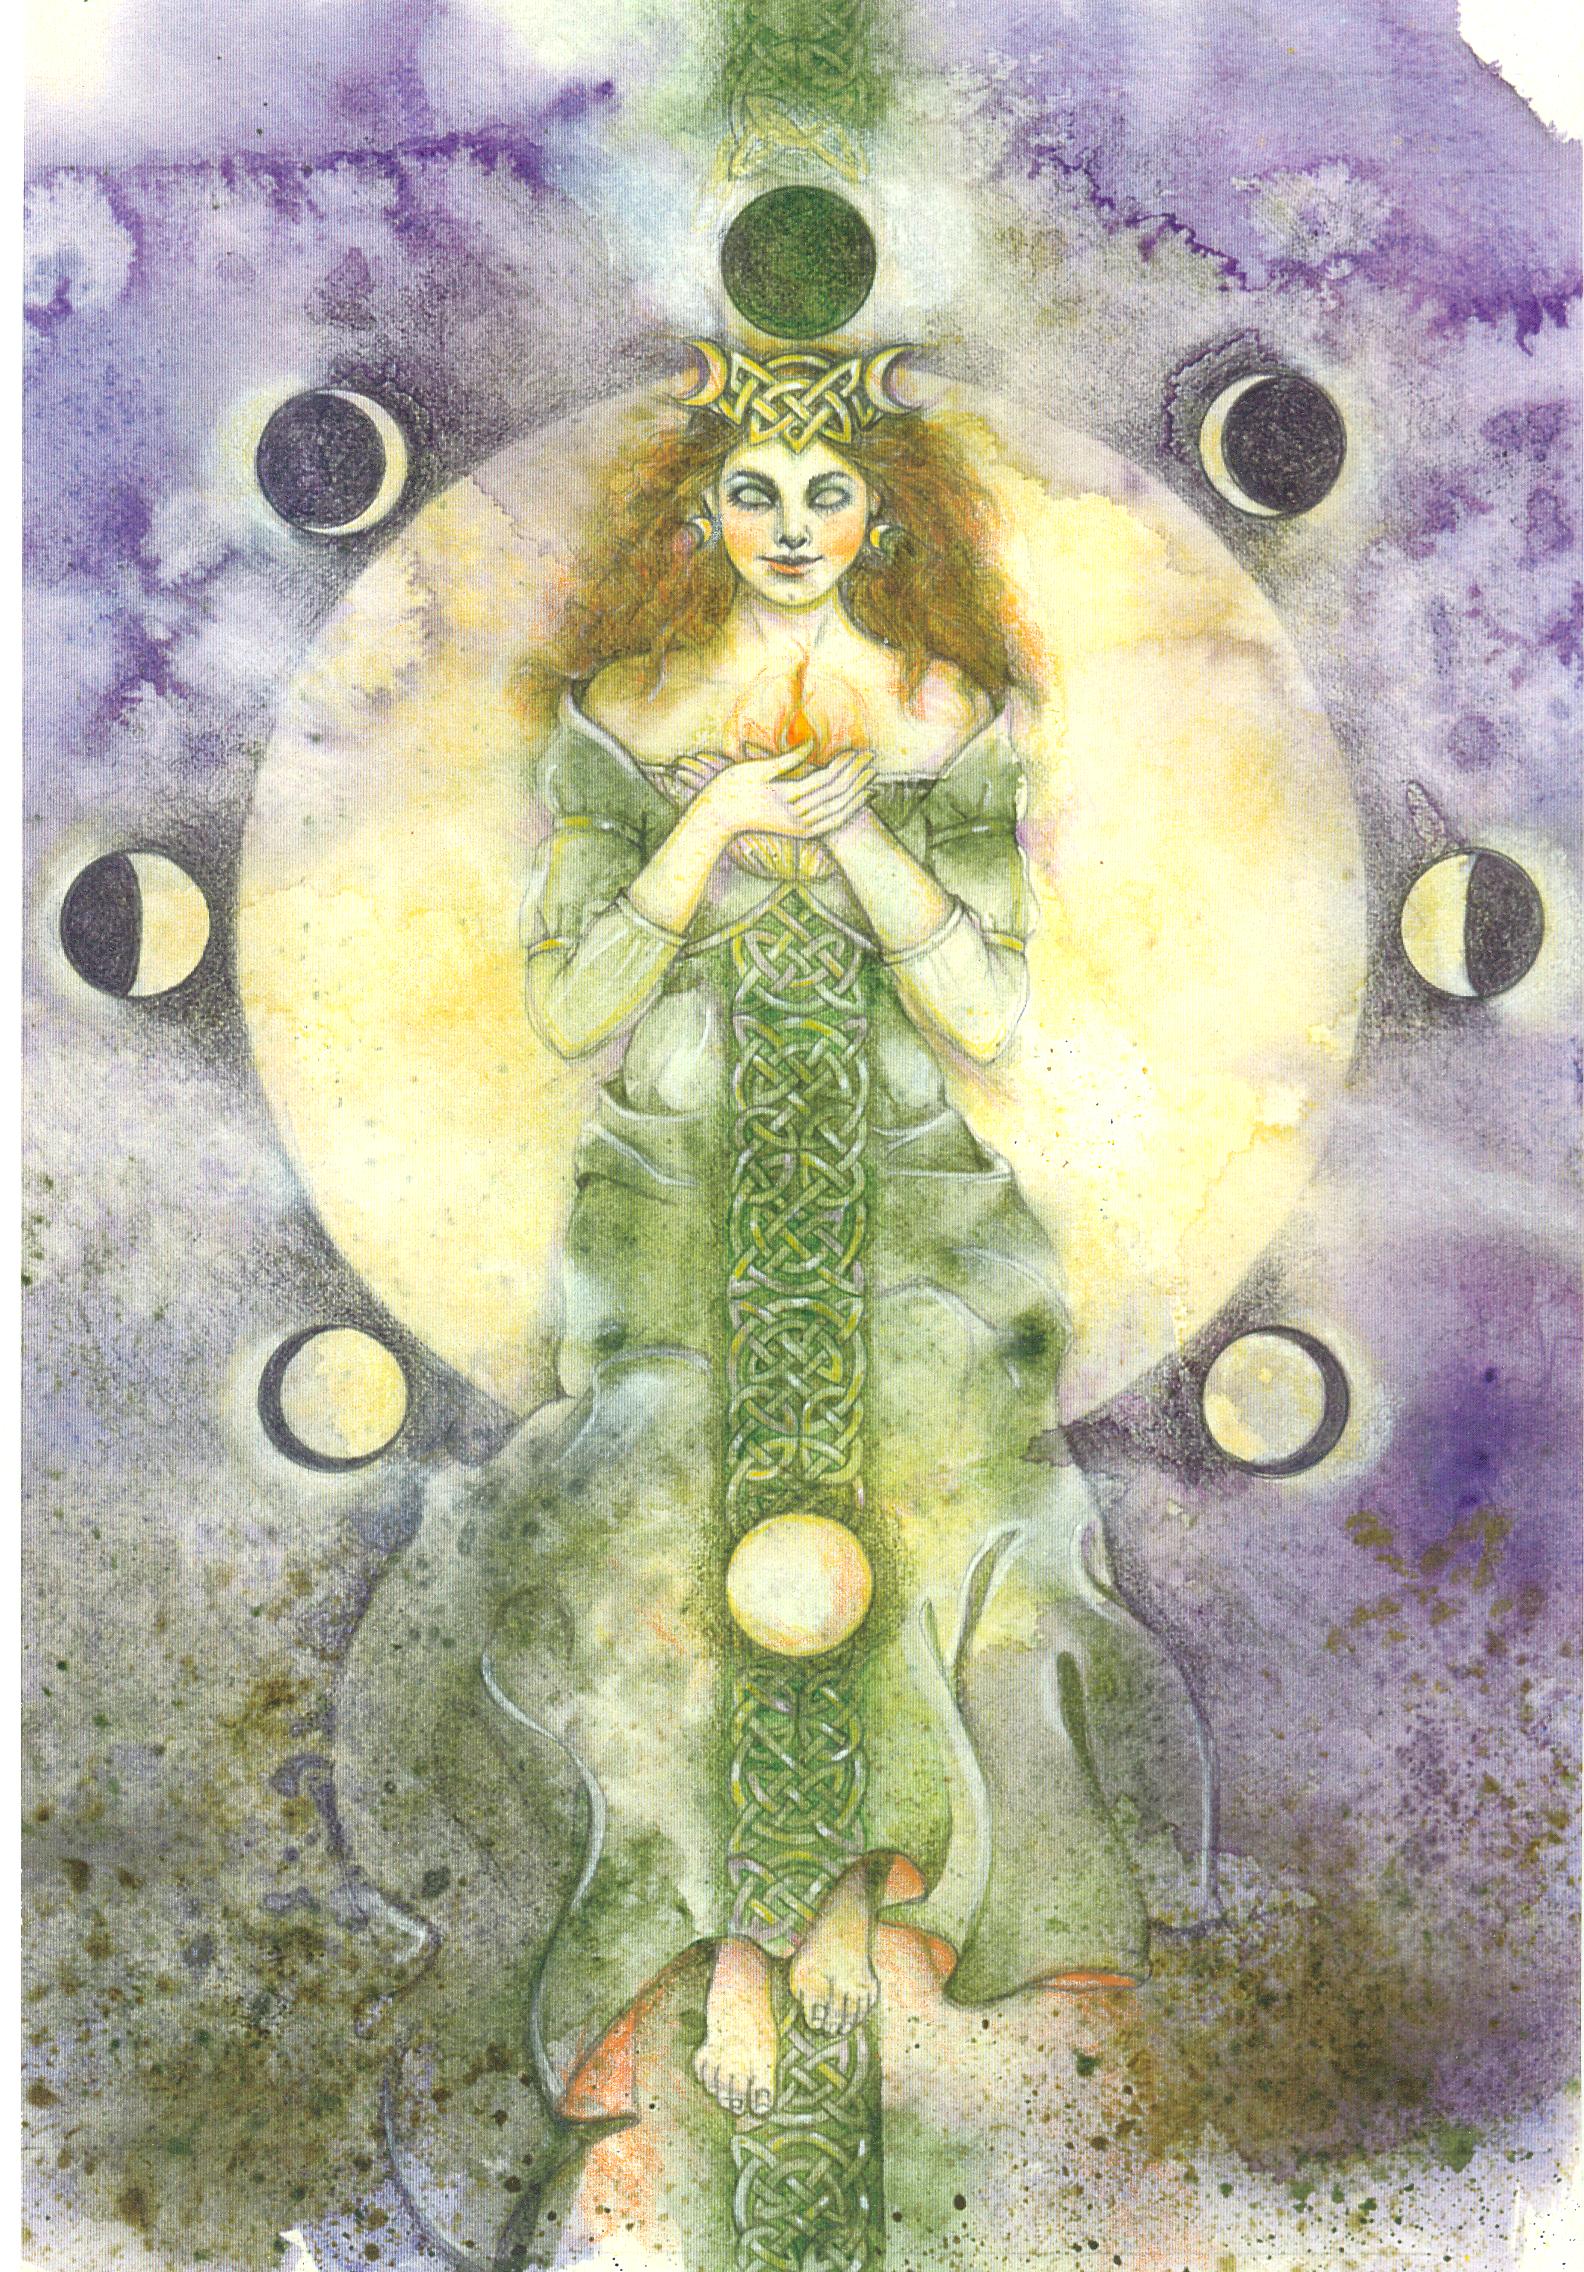 CYCLES OF BECOMING #3 New Moon Phase